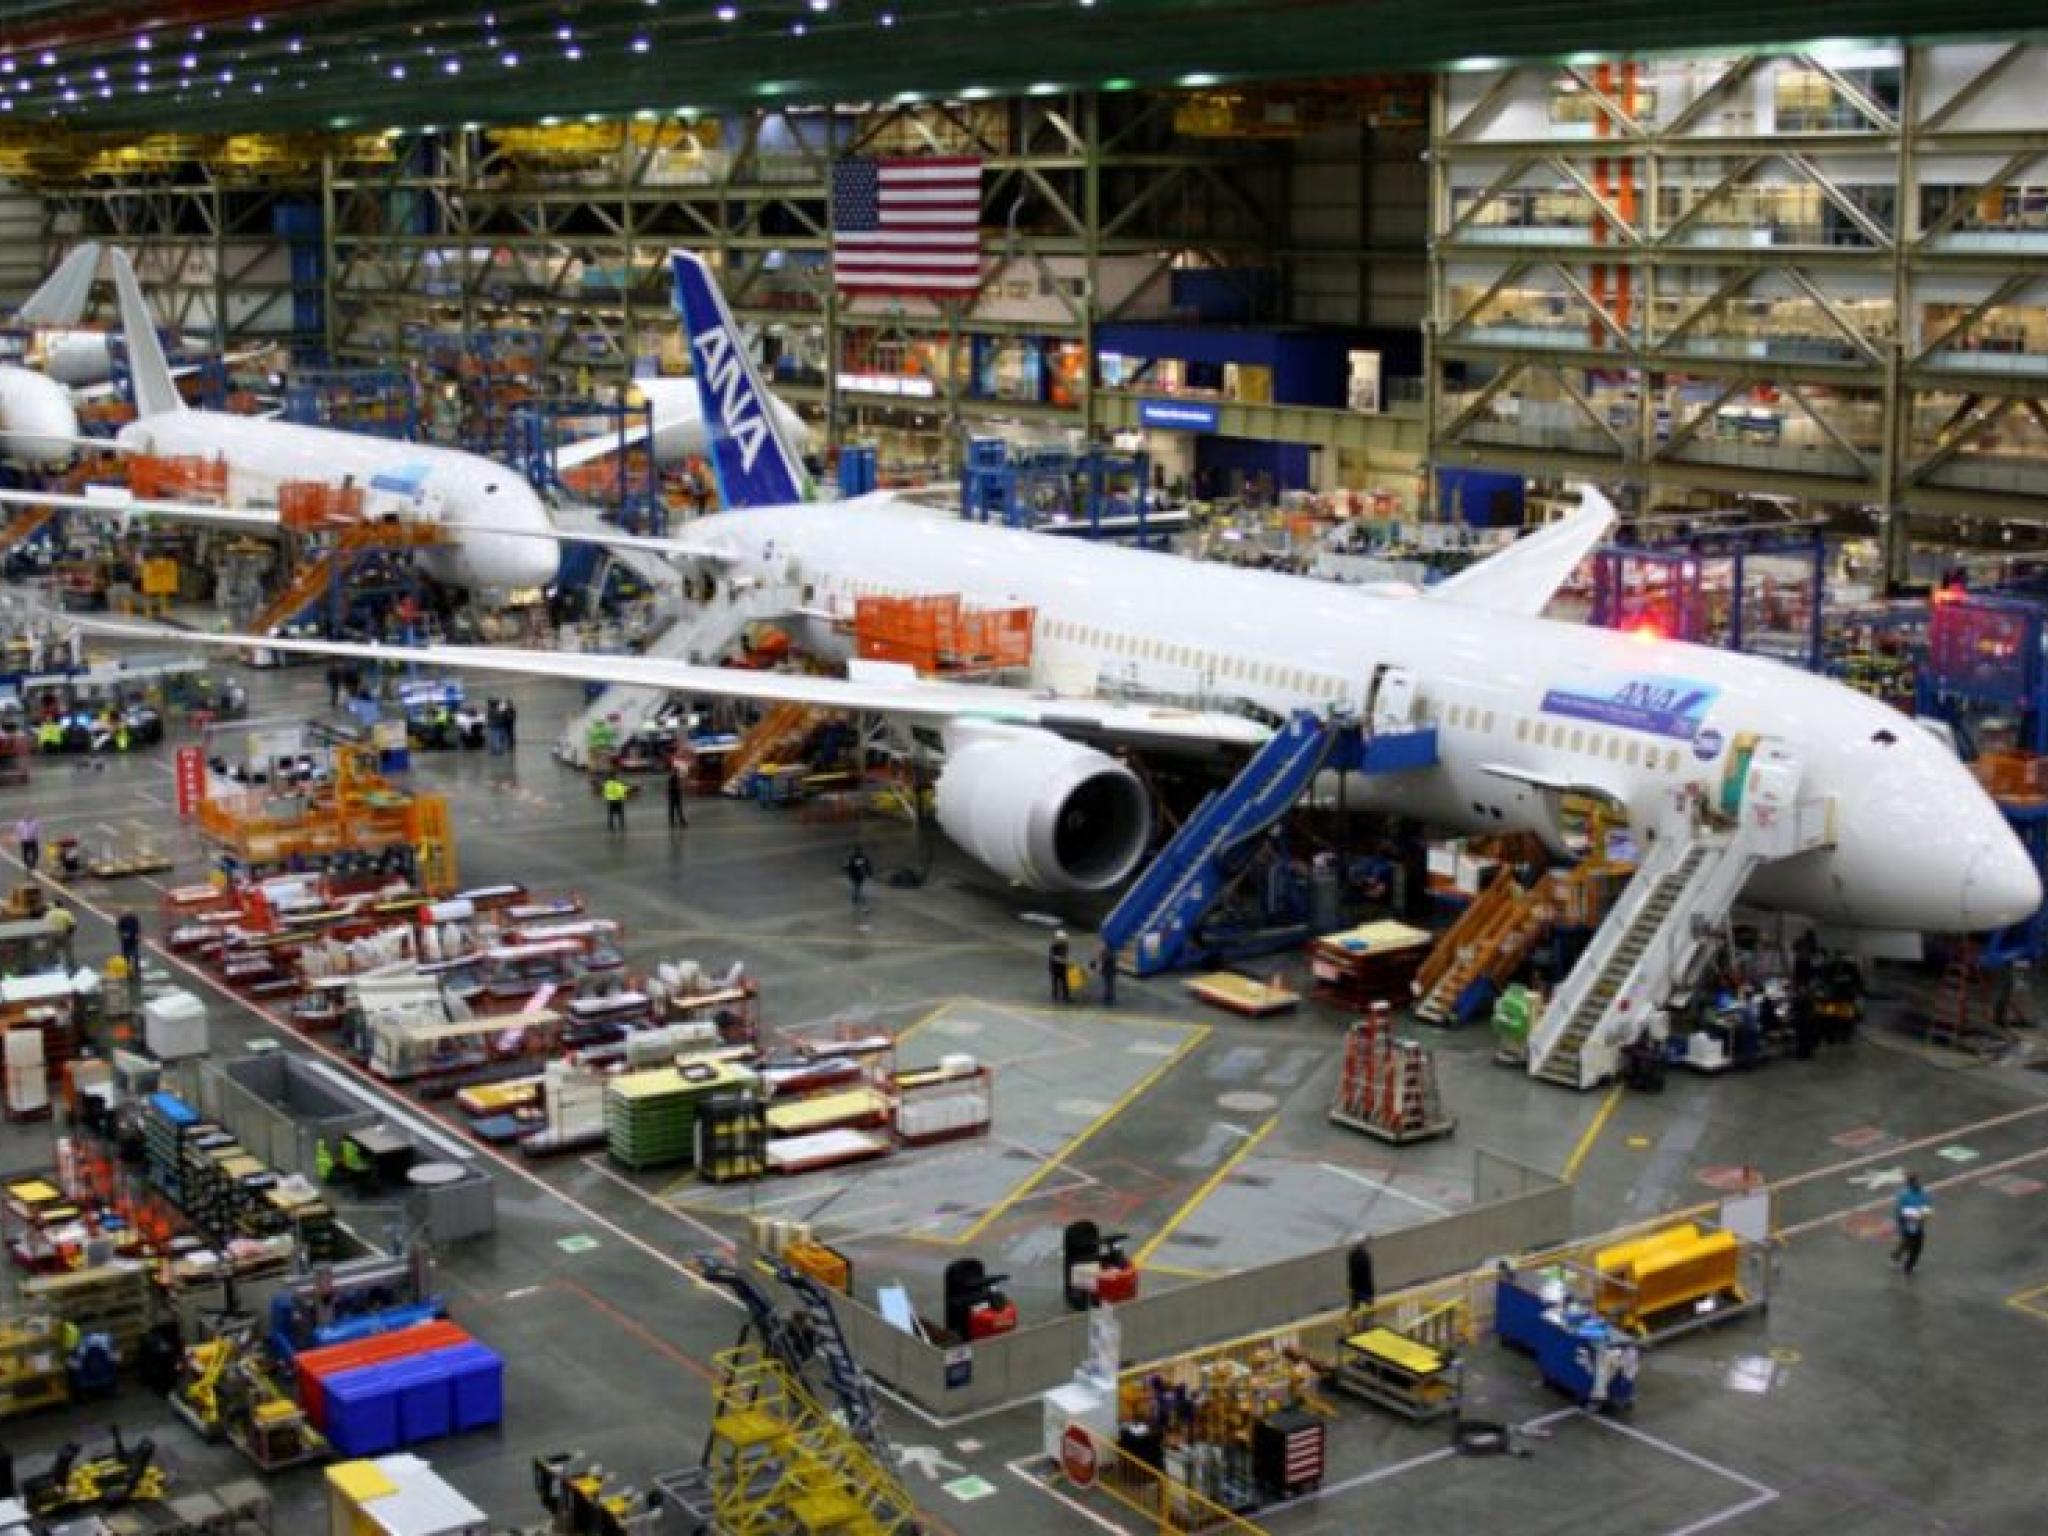  boeing-to-present-quality-control-plan-to-faa-in-wake-of-737-max-crisis 